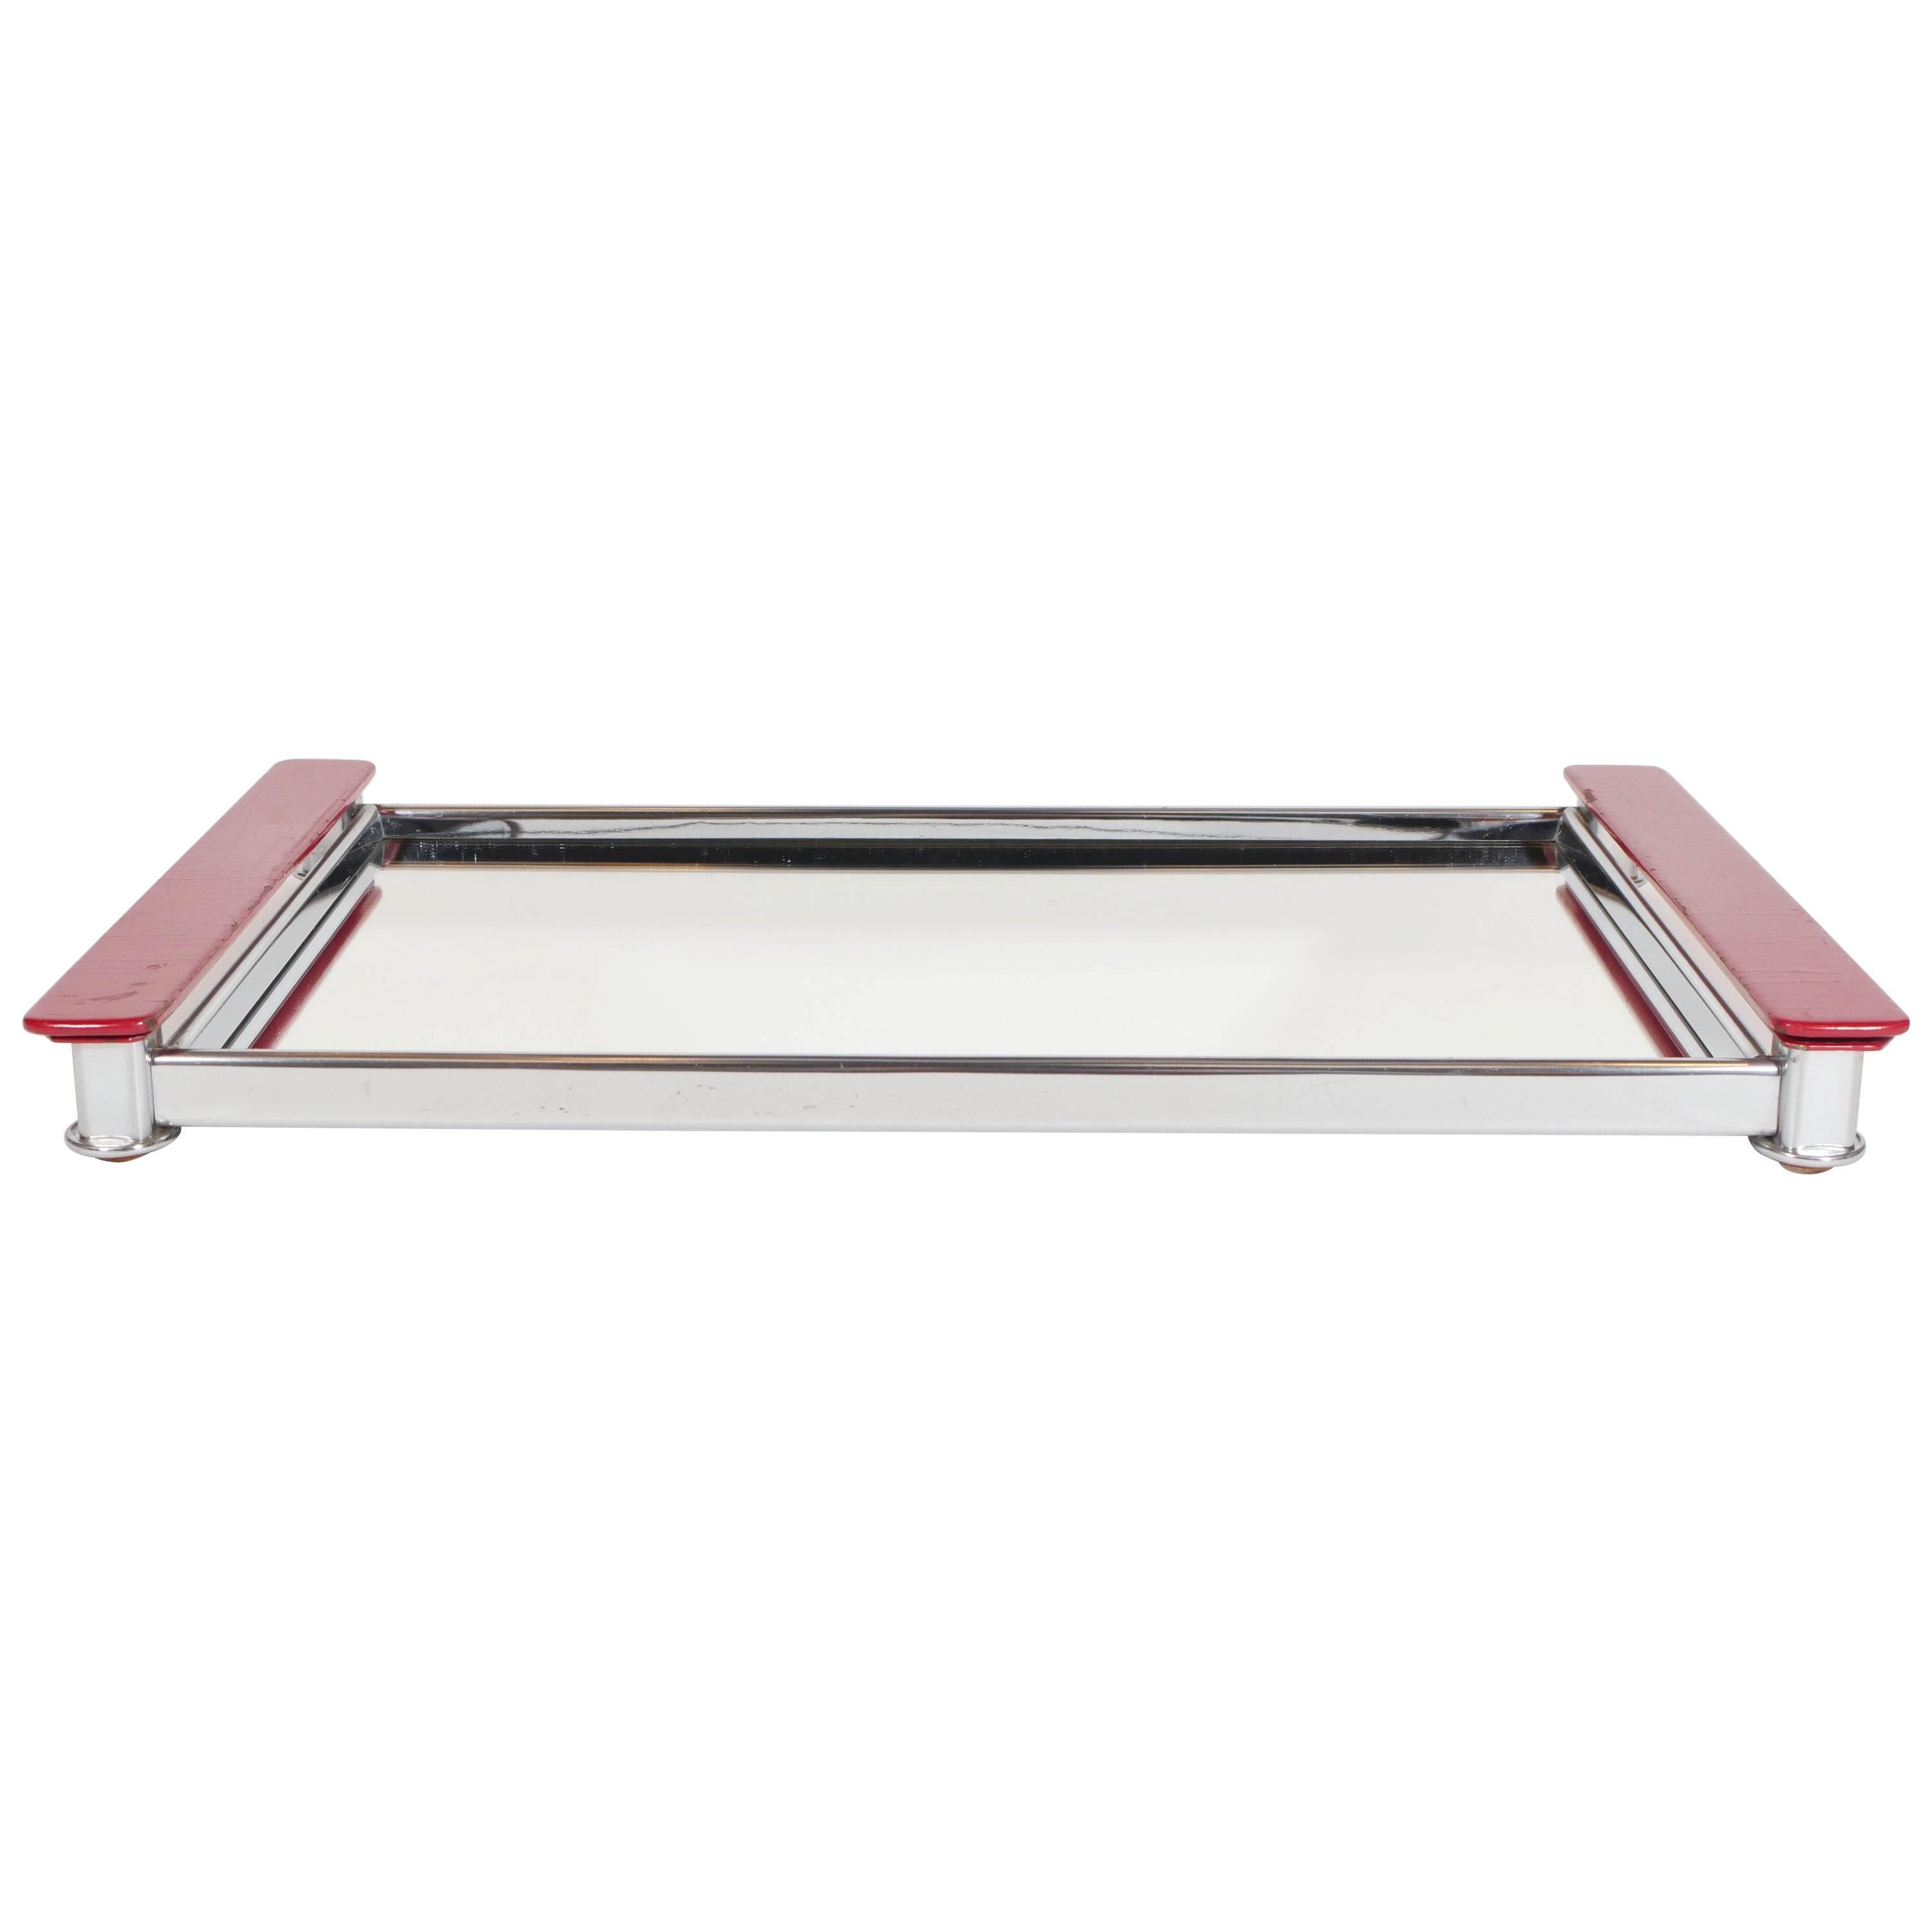 Art Deco serving tray with Machine Age design. The tray has a streamlined polished chrome frame and features a mirrored center with wonderful lacquered wood handles in a vibrant red. Excellent addition to any barware collection or as a vanity tray